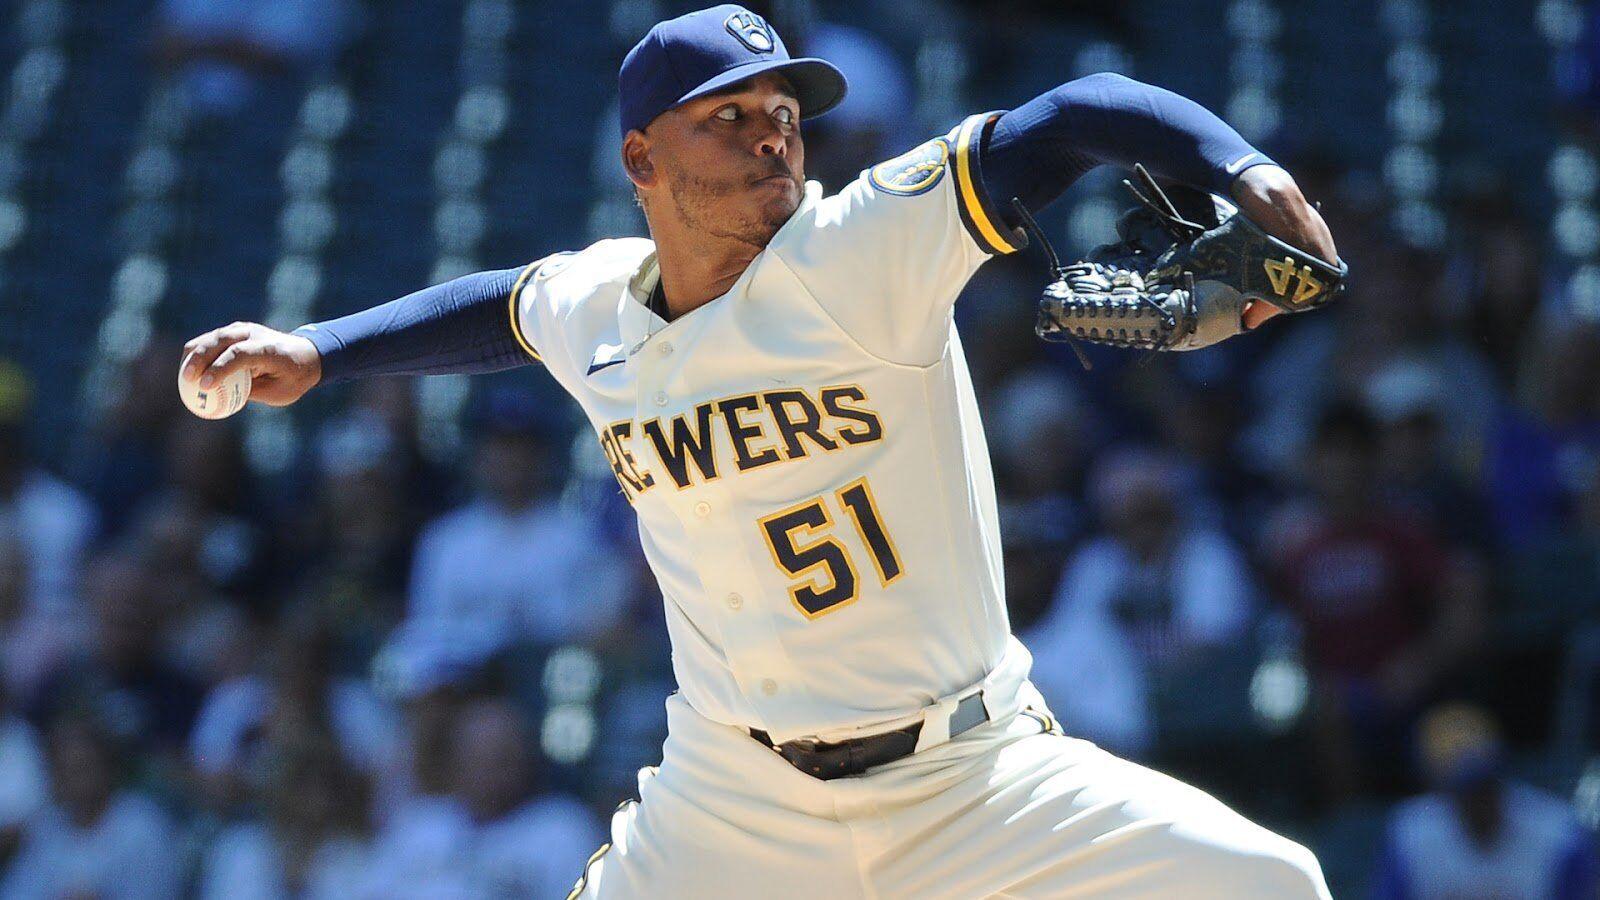 Northwestern Mutual is the new jersey patch partner for the Milwaukee  Brewers